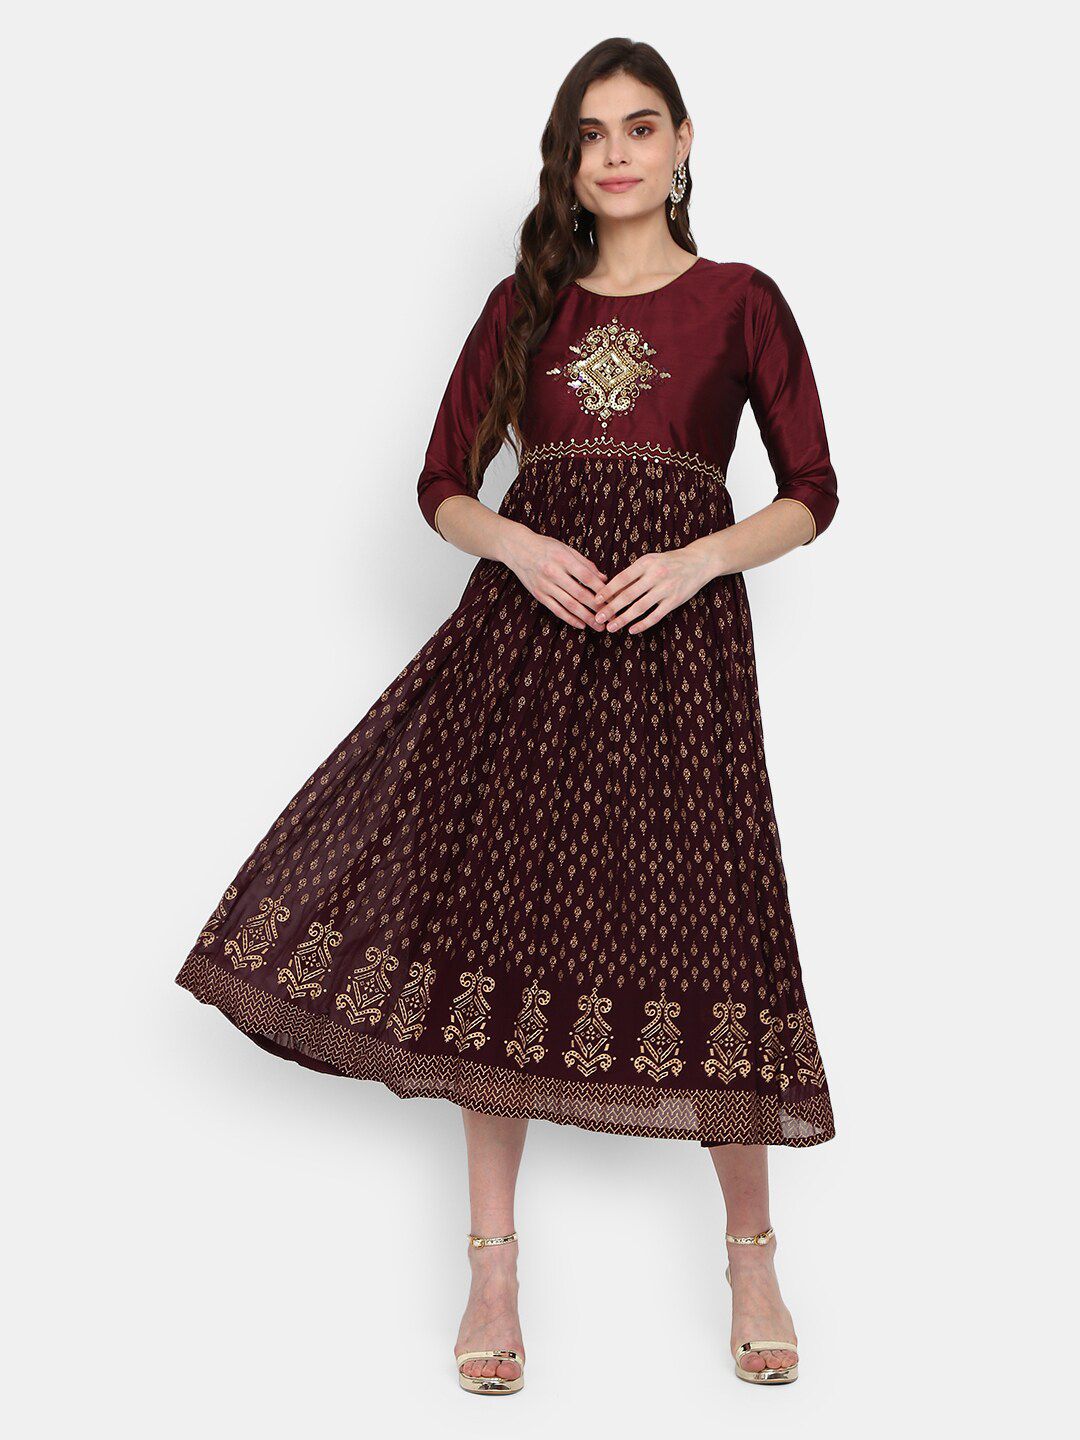 V-Mart Red & Gold-Toned Ethnic Printed Embroidered Cotton Ethnic Fit & Flare Midi Dress Price in India